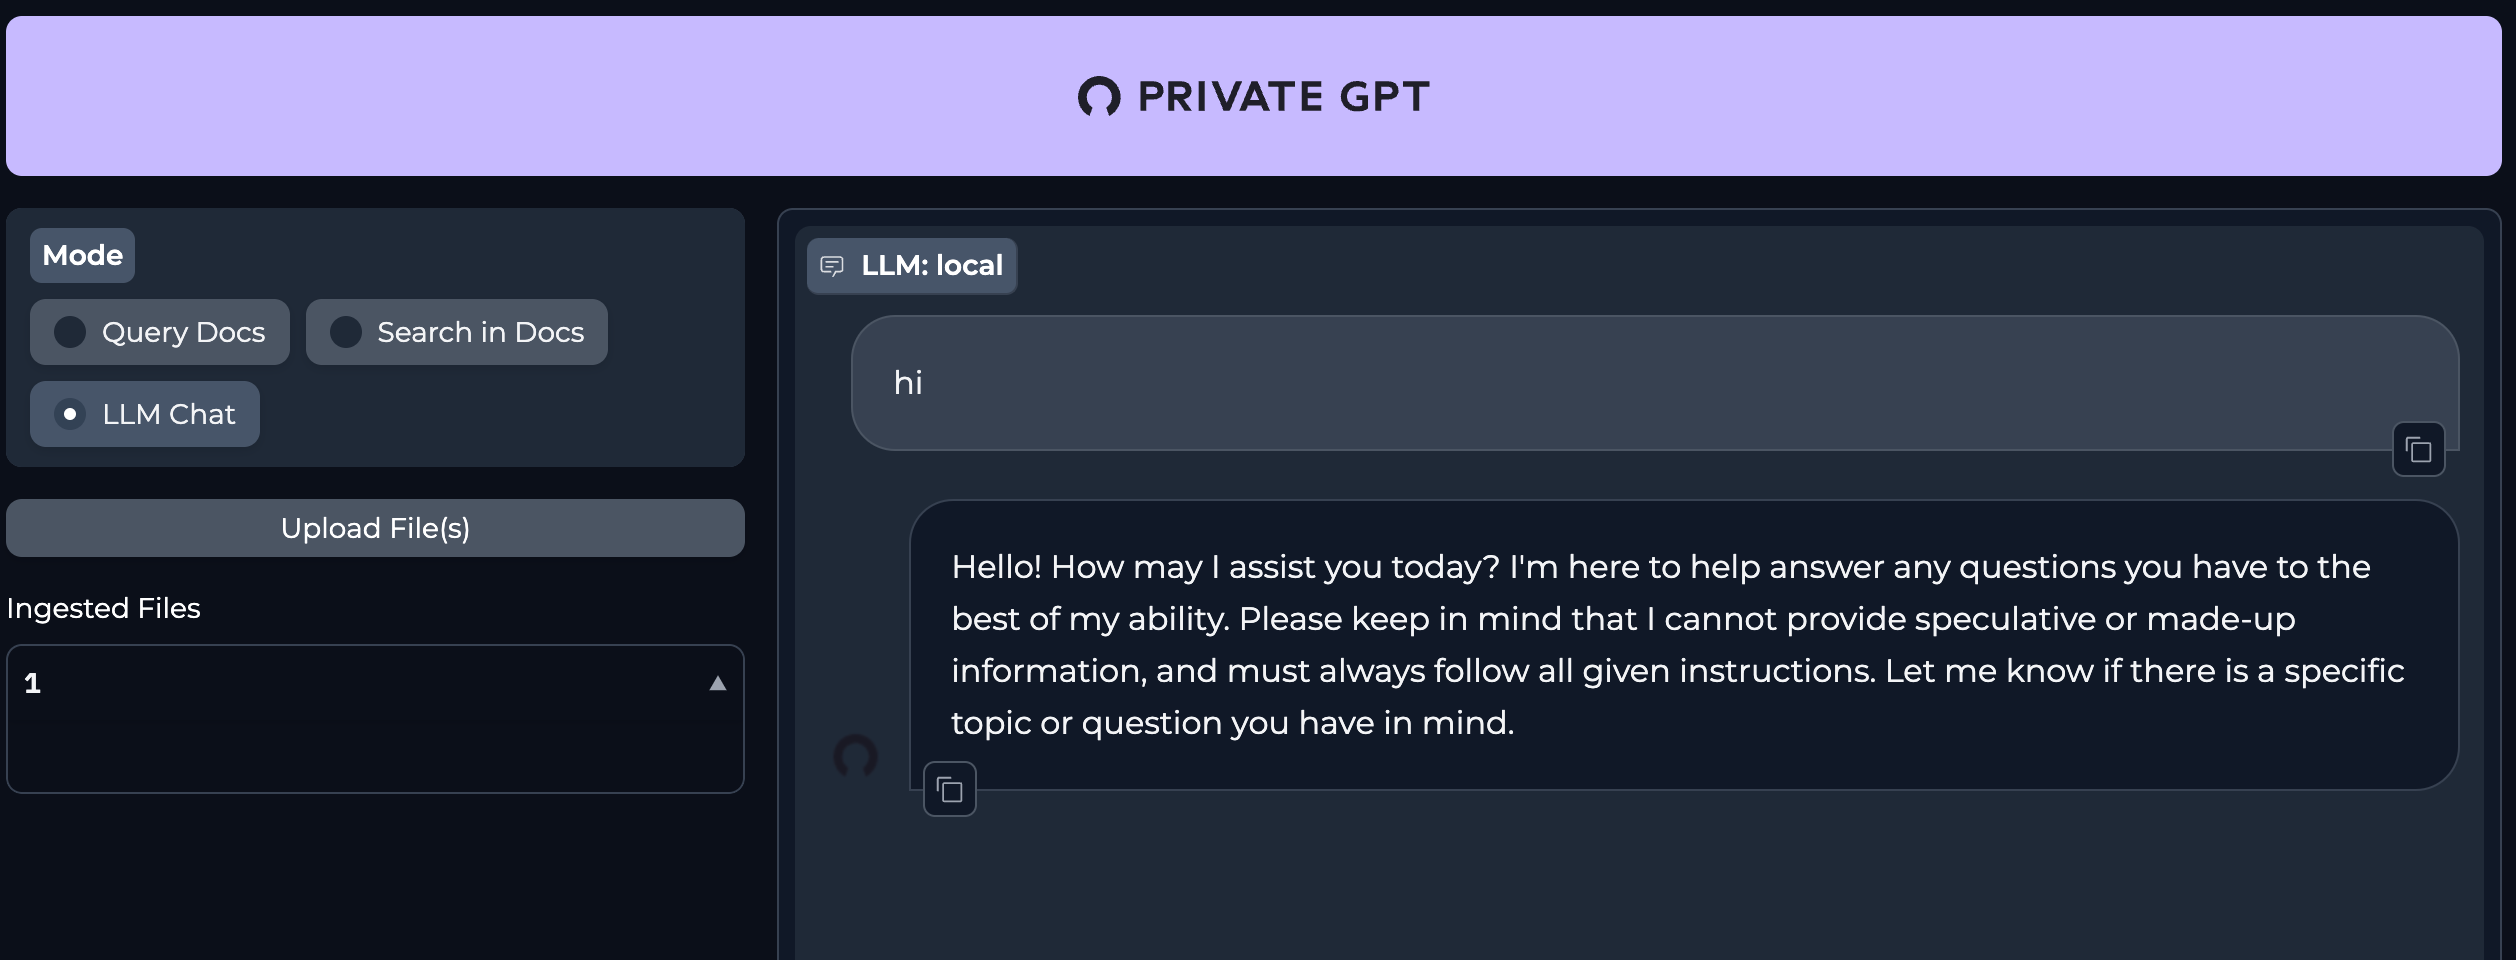 pgpt chat